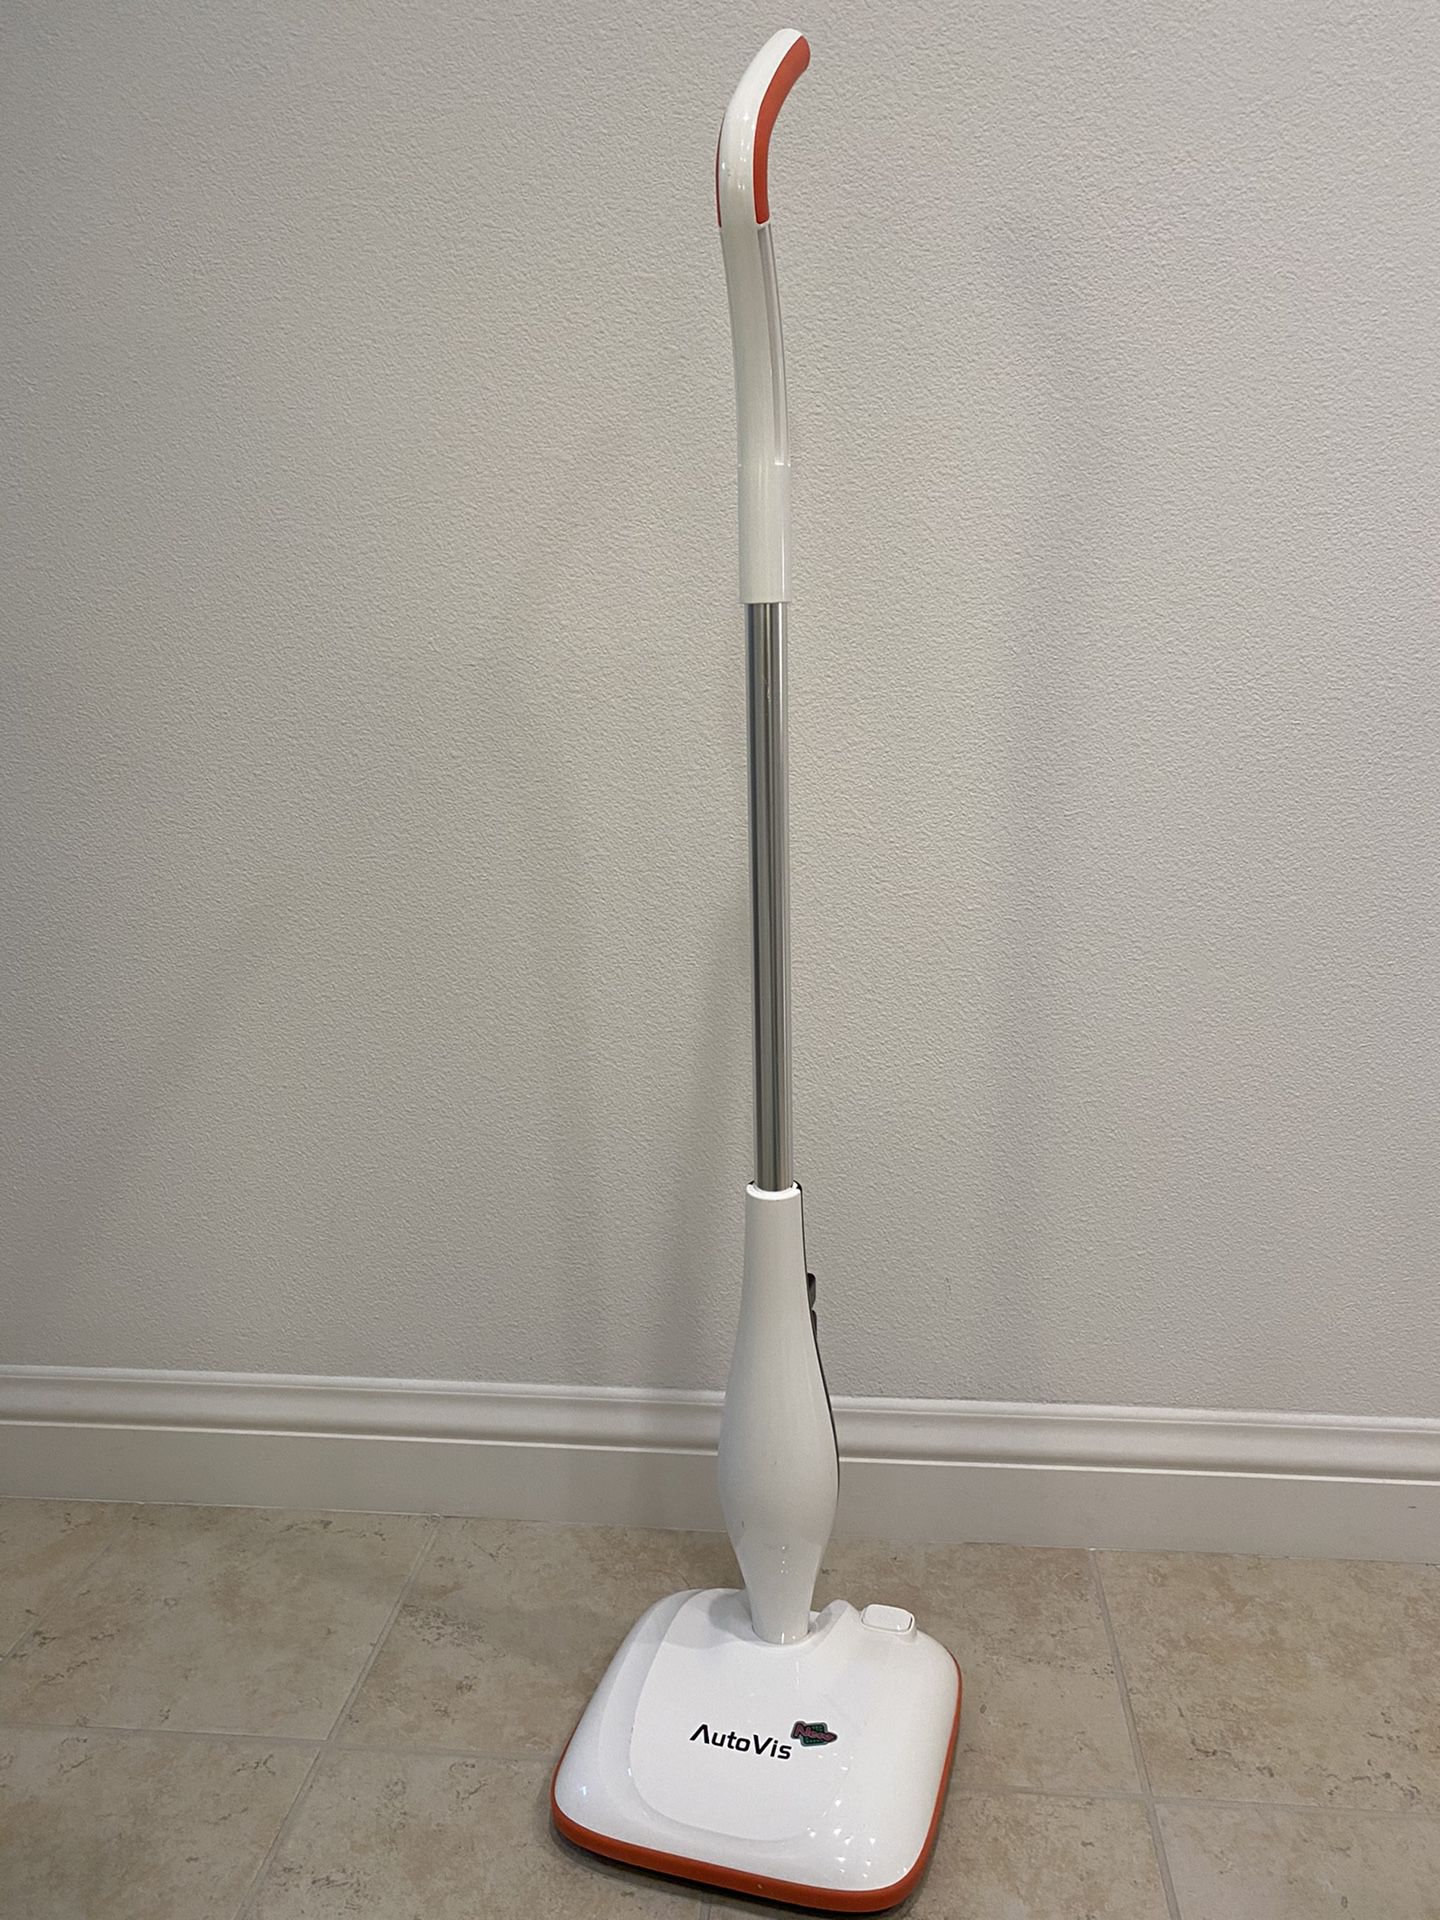 Autovis Electric Wet And Dry Sweeper & Mopping Machine